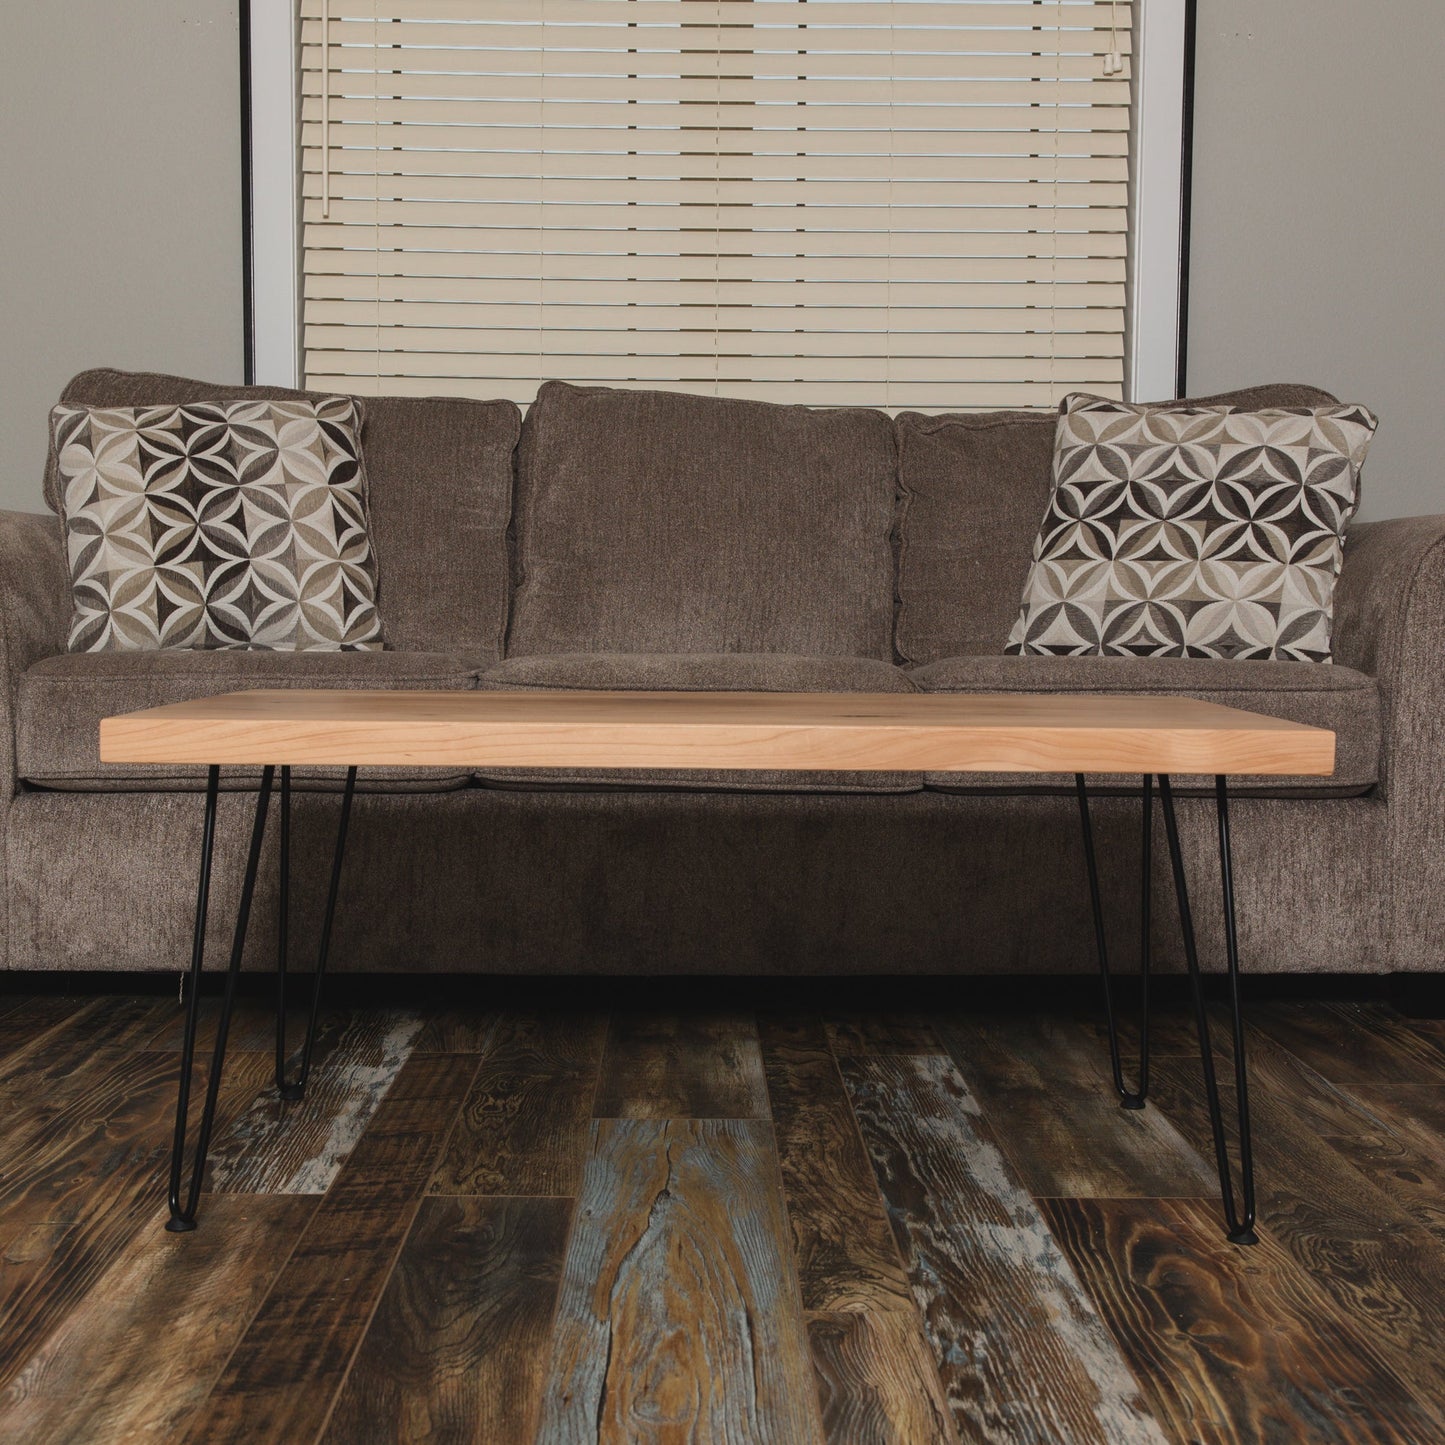 The Modern Hardwood Coffee Table - FargoWoodworks